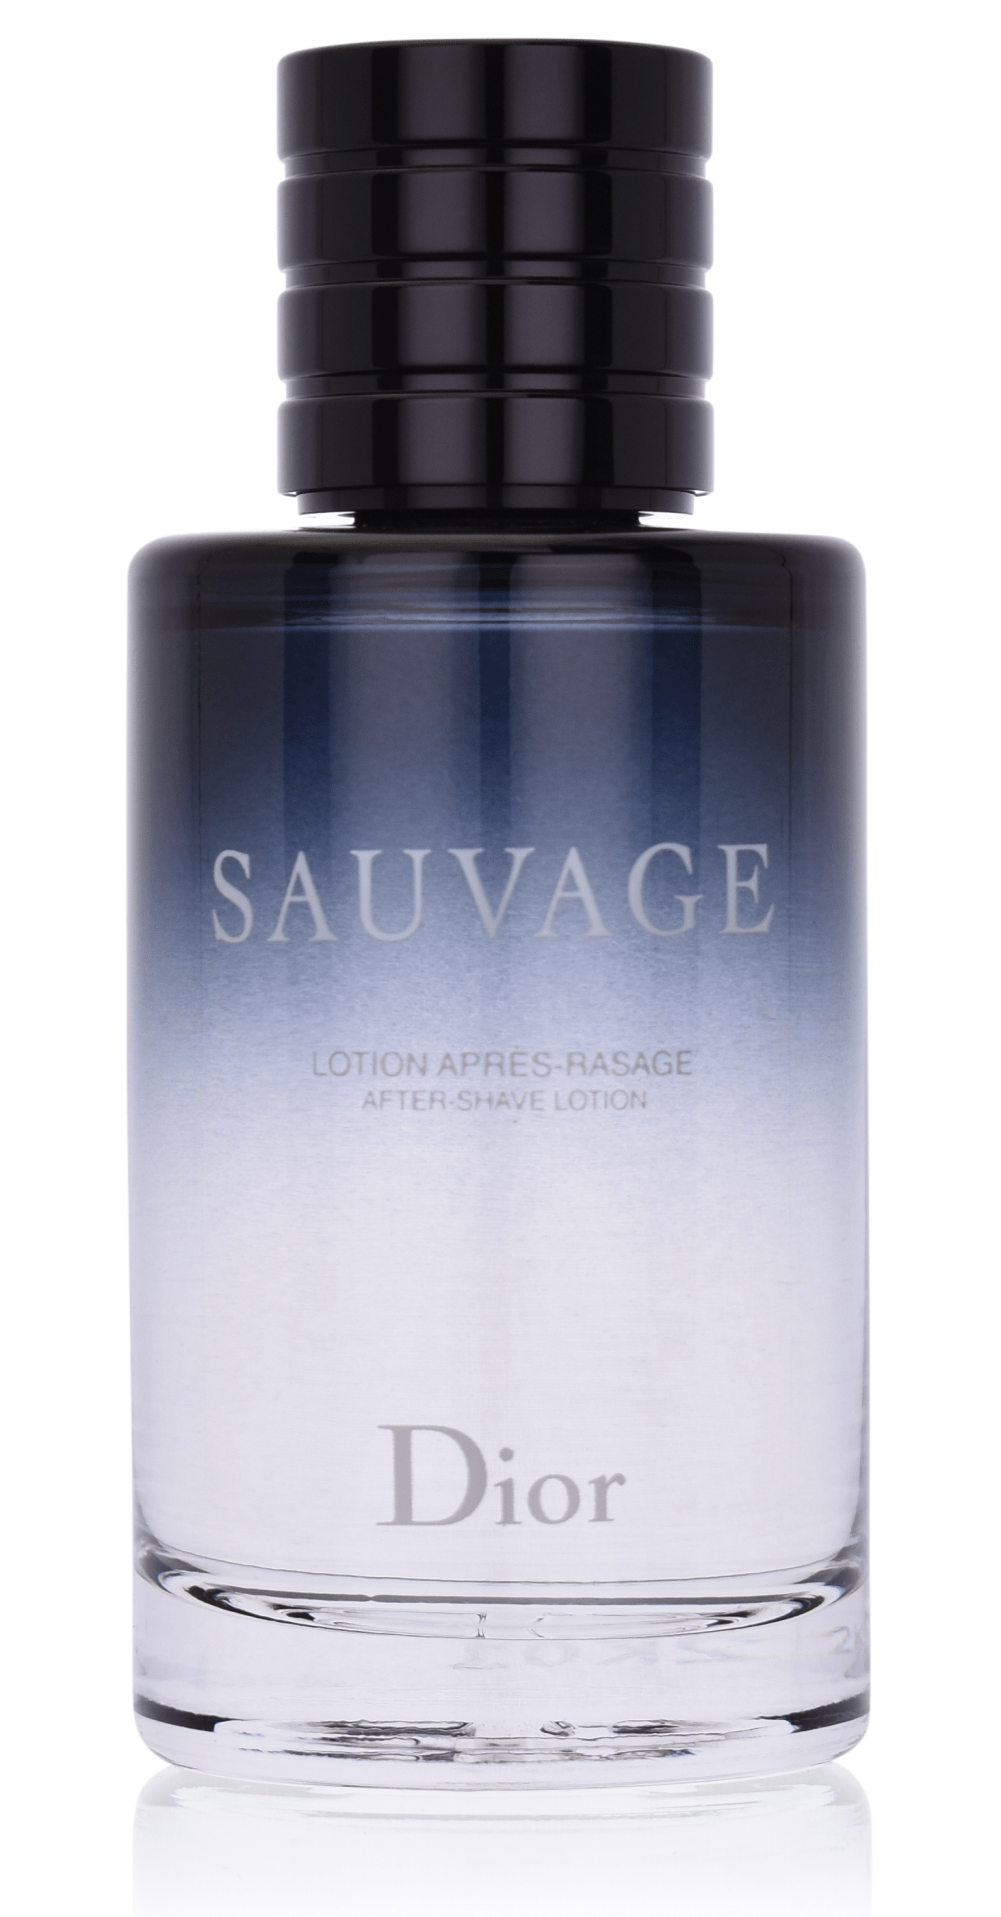 Dior Sauvage 100 ml After Shave